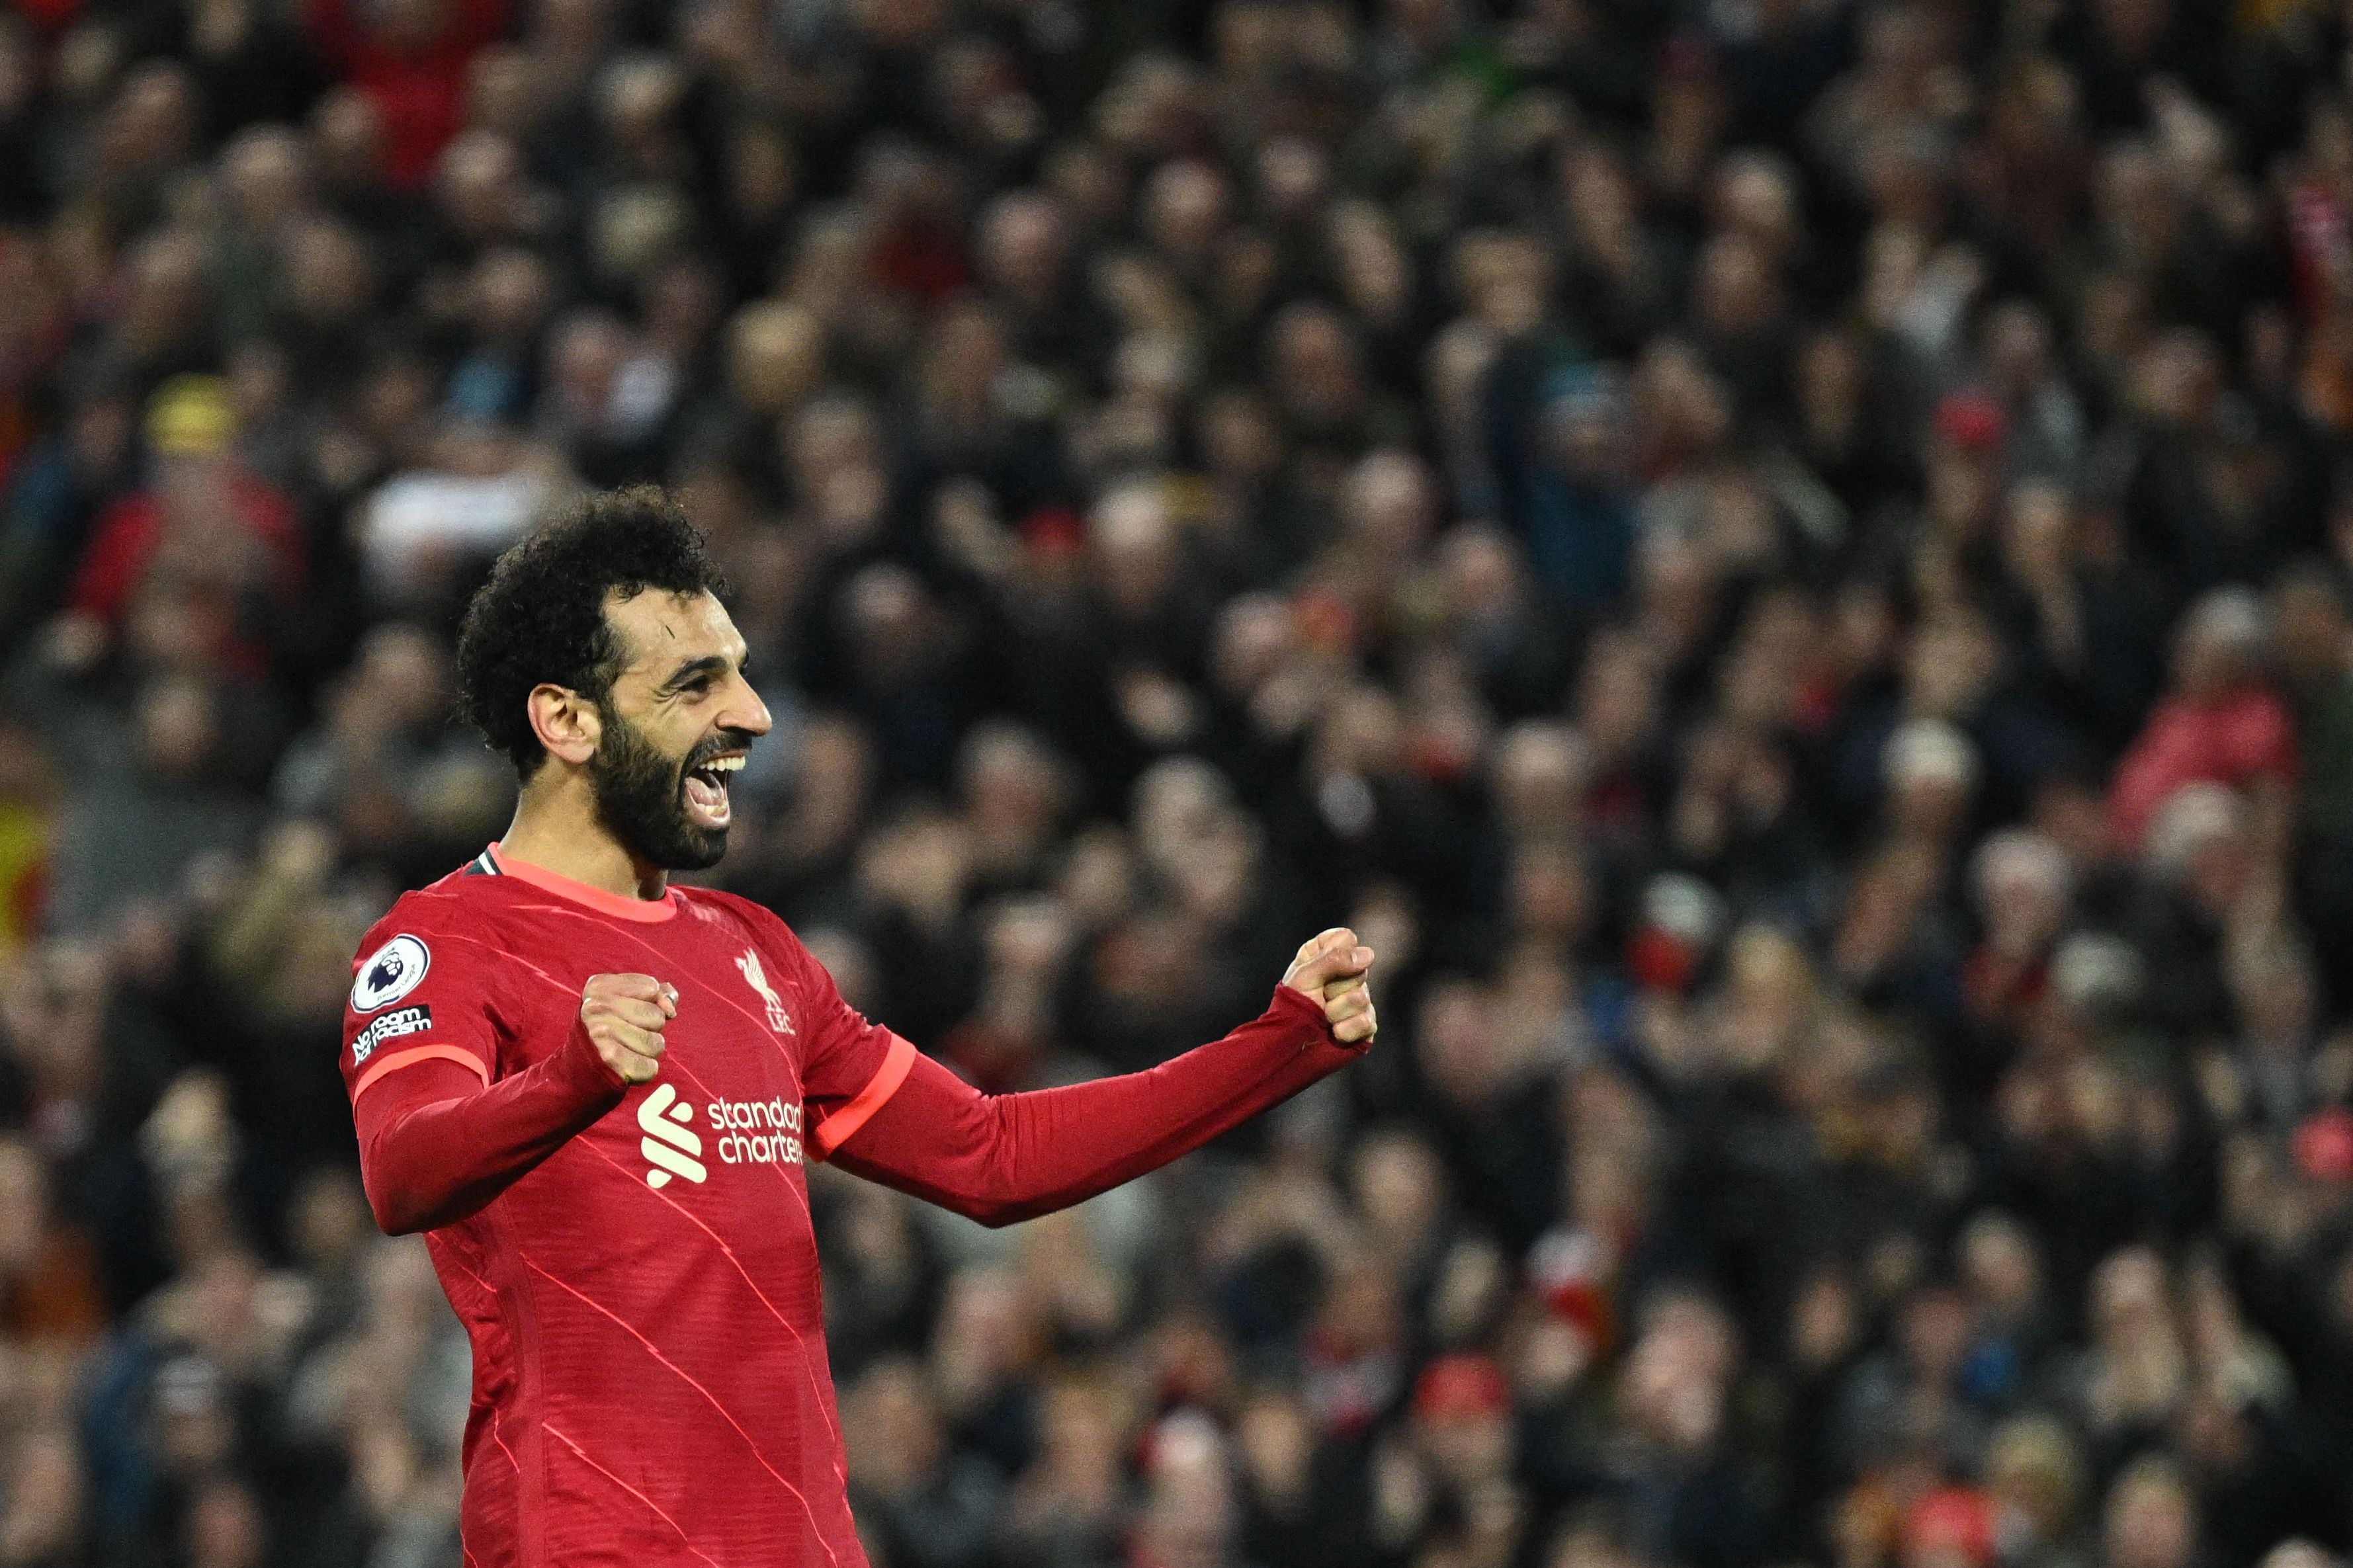 Mo Salah rounded off the victory with a fourth goal late on